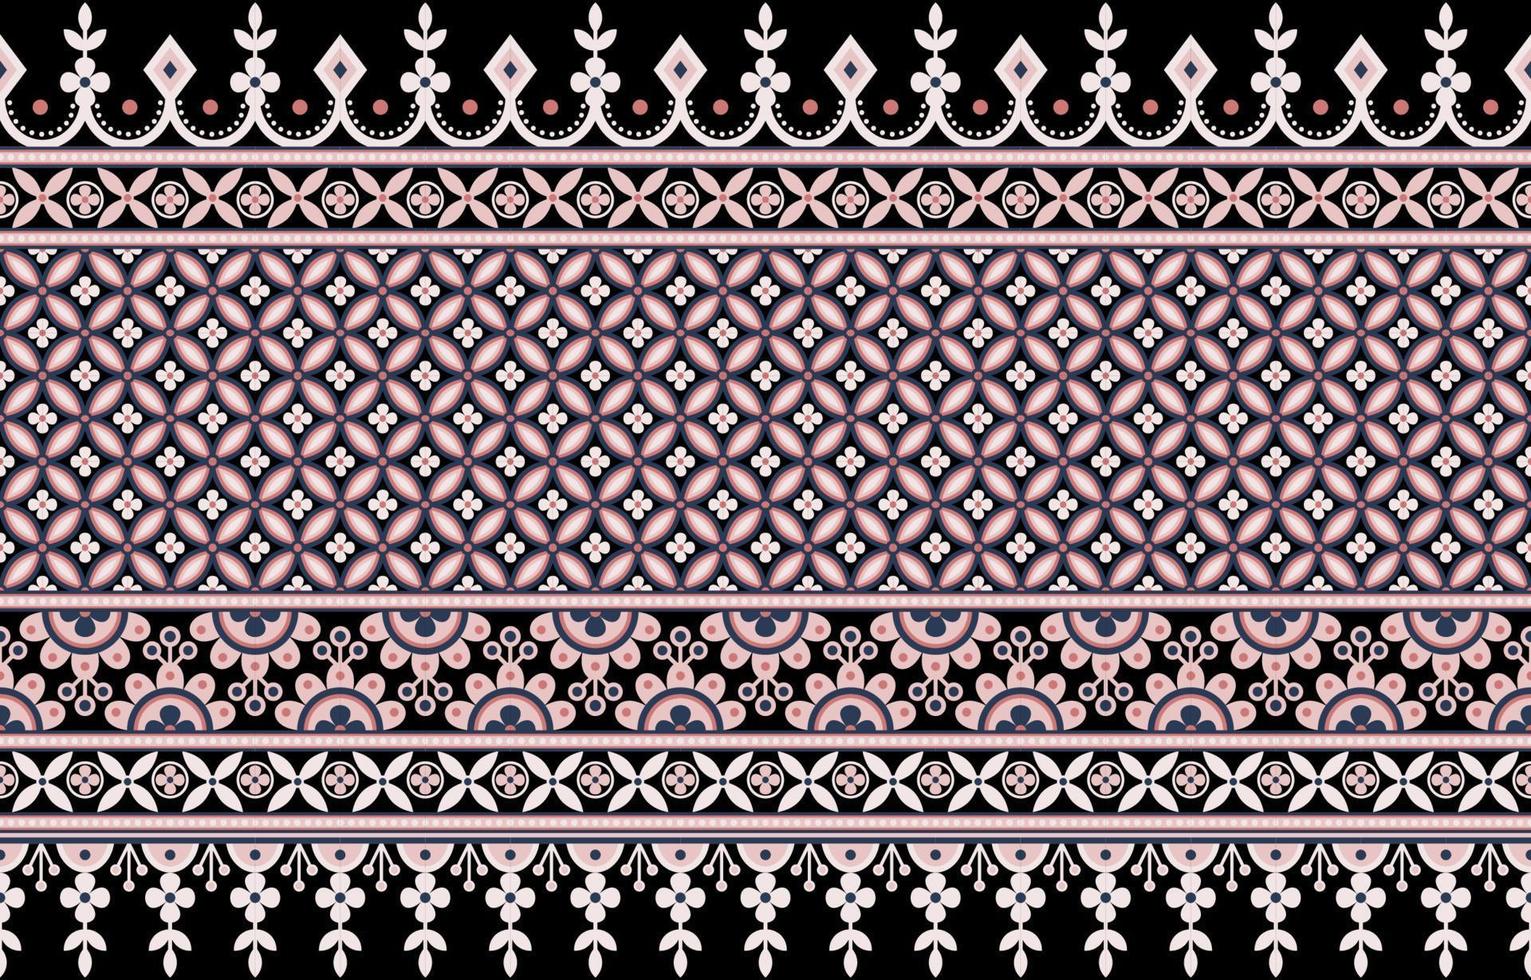 Abstract ethnic geometric pattern design background for wallpaper or other fabric pattern. vector